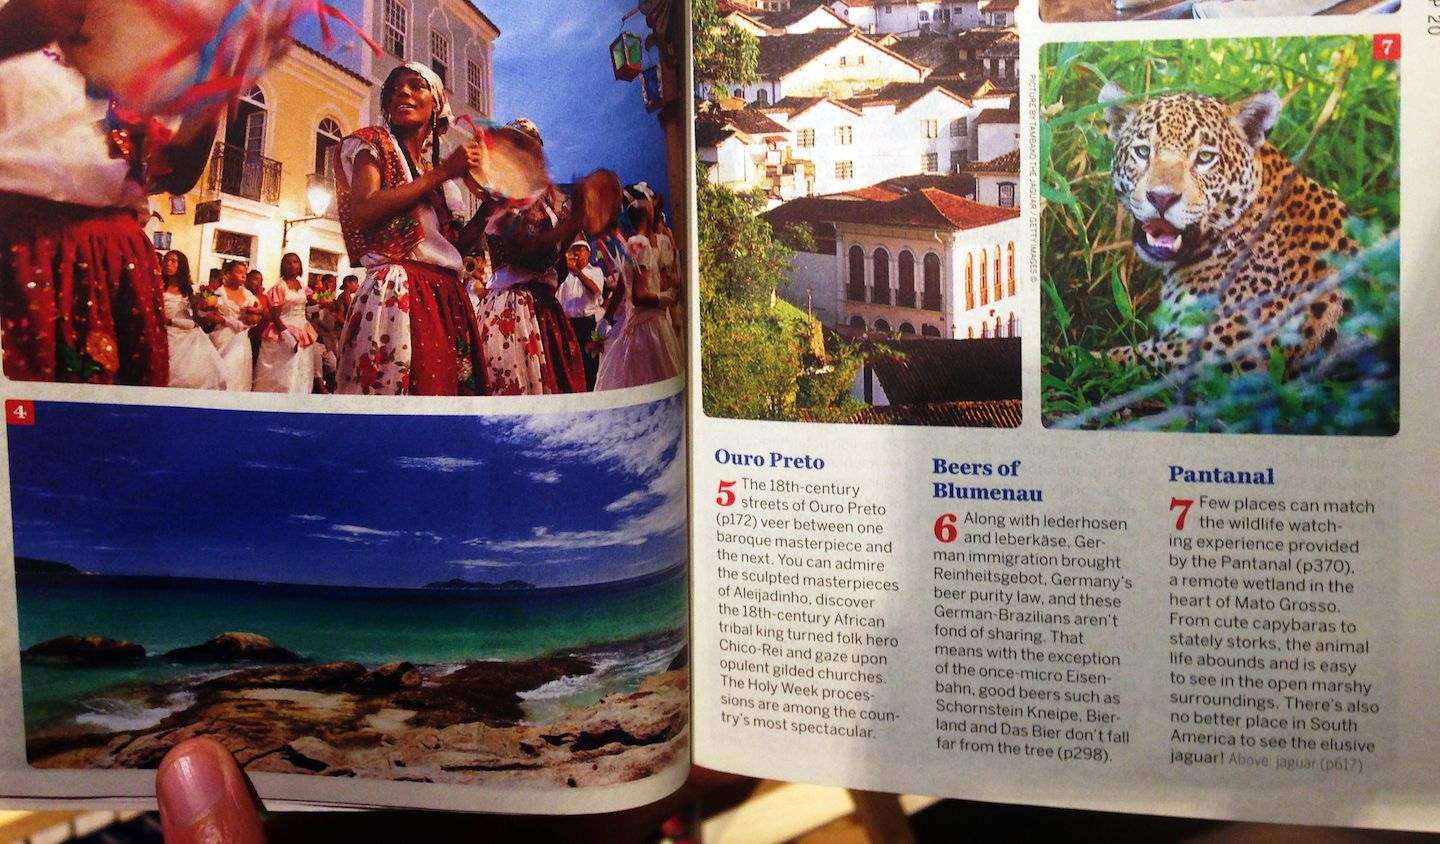 Blumenau listed as #6 top attraction in the Lonely Planet Brazil guidebook